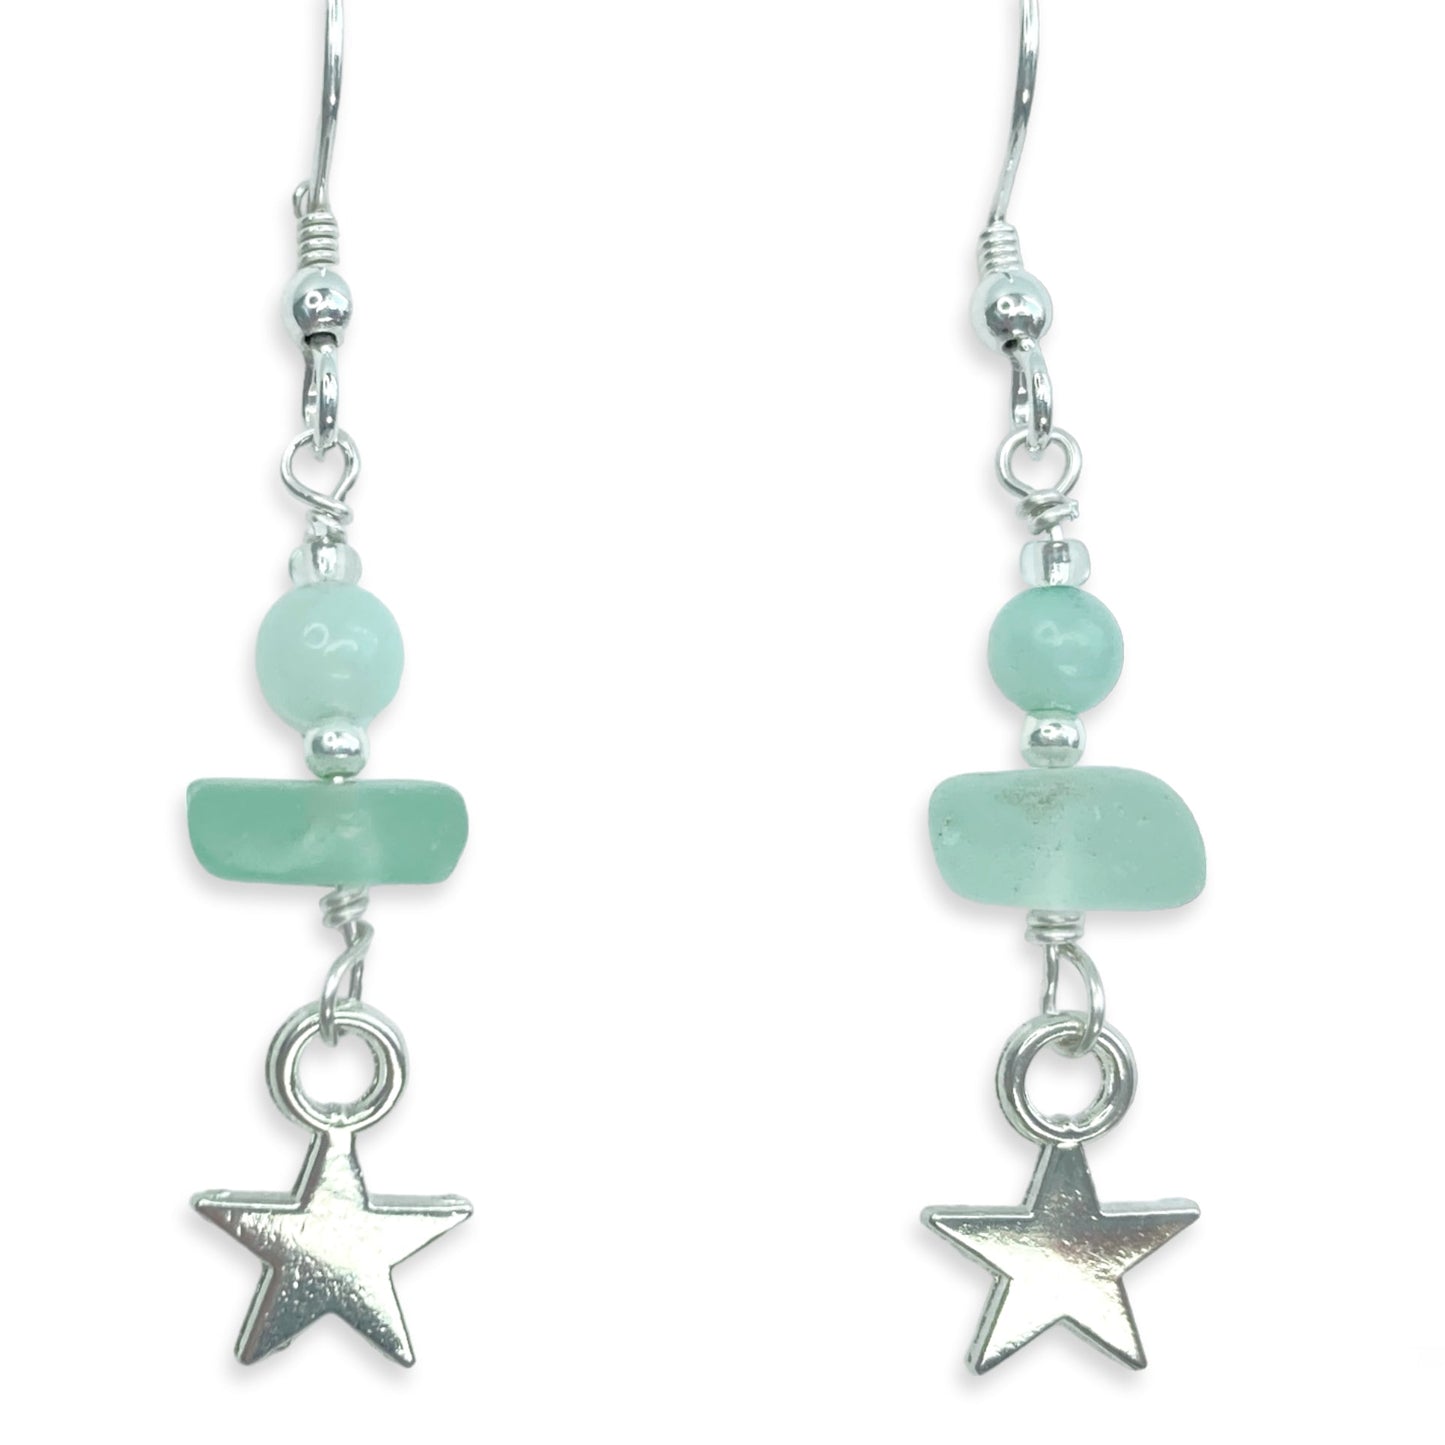 Star Earrings - Green Sea Glass & Silver Jewellery with Amazonite Crystal Beads - East Neuk Beach Crafts